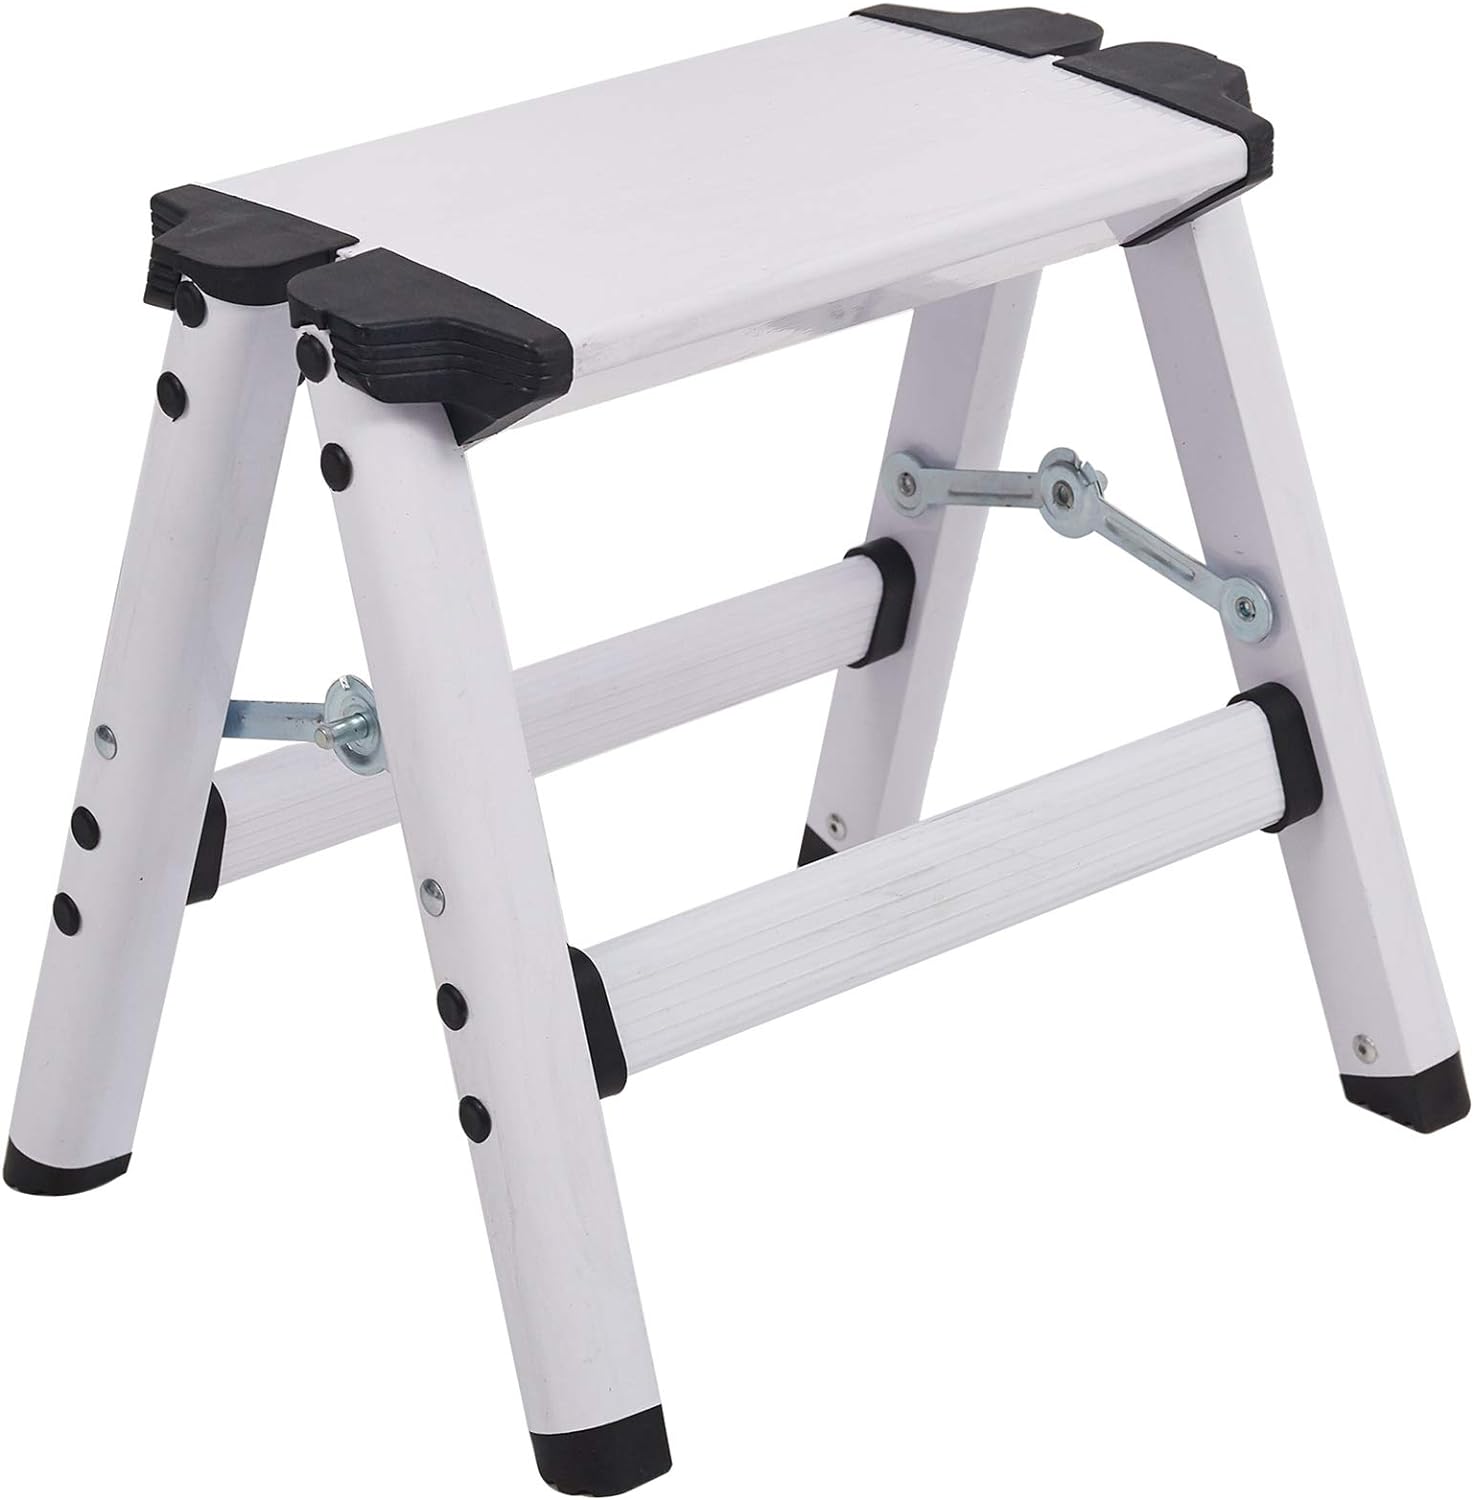 2 Step Stool Light Weight Aluminum Step Ladder with a Secure Standing Platform 330 lbs Capacity